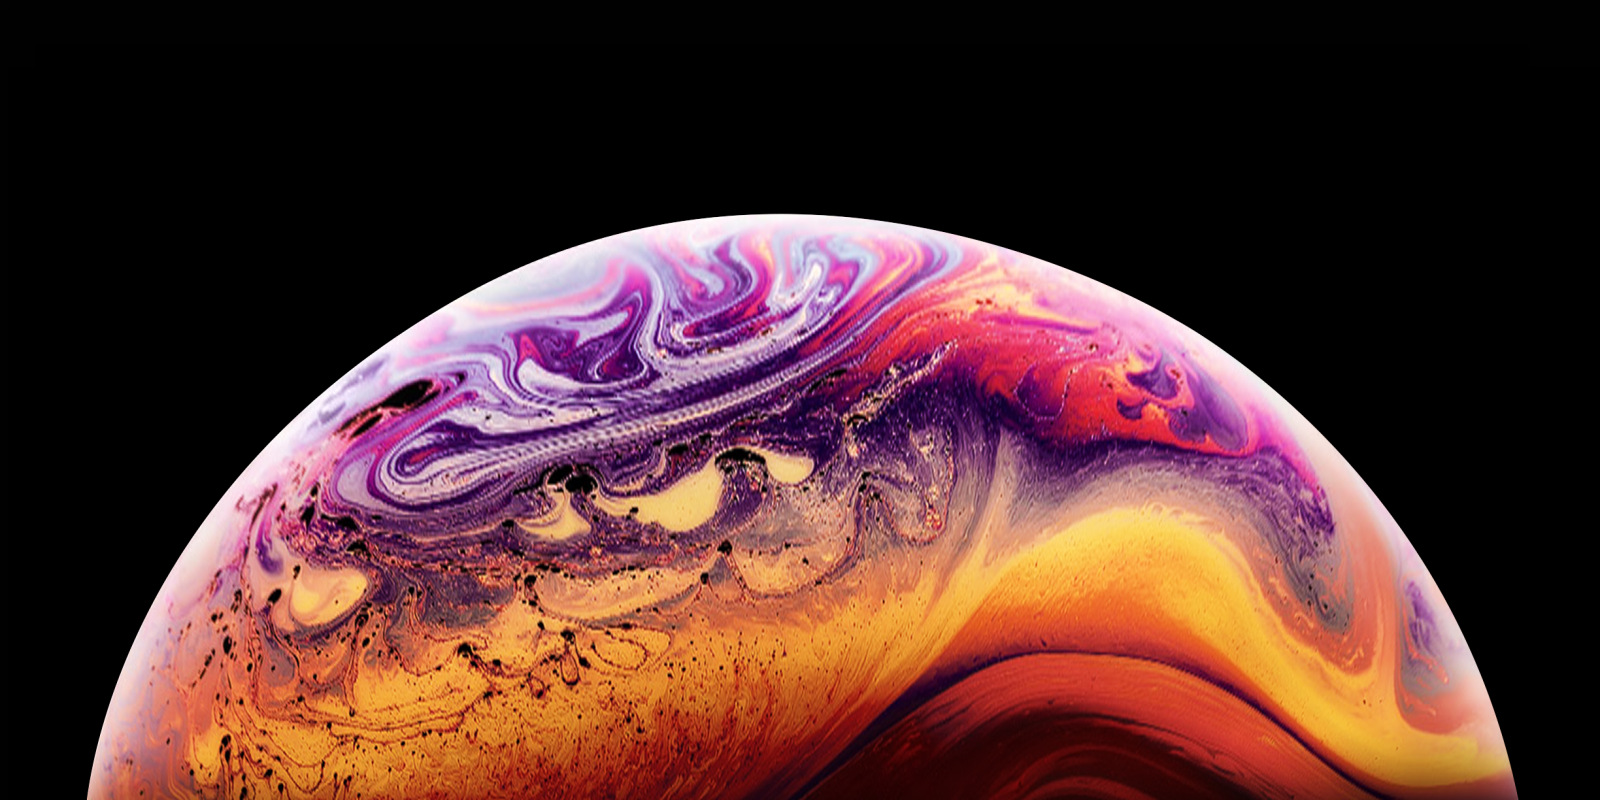 When Was Wallpaper First Used - Iphone Xs Wallpaper For Mac - HD Wallpaper 